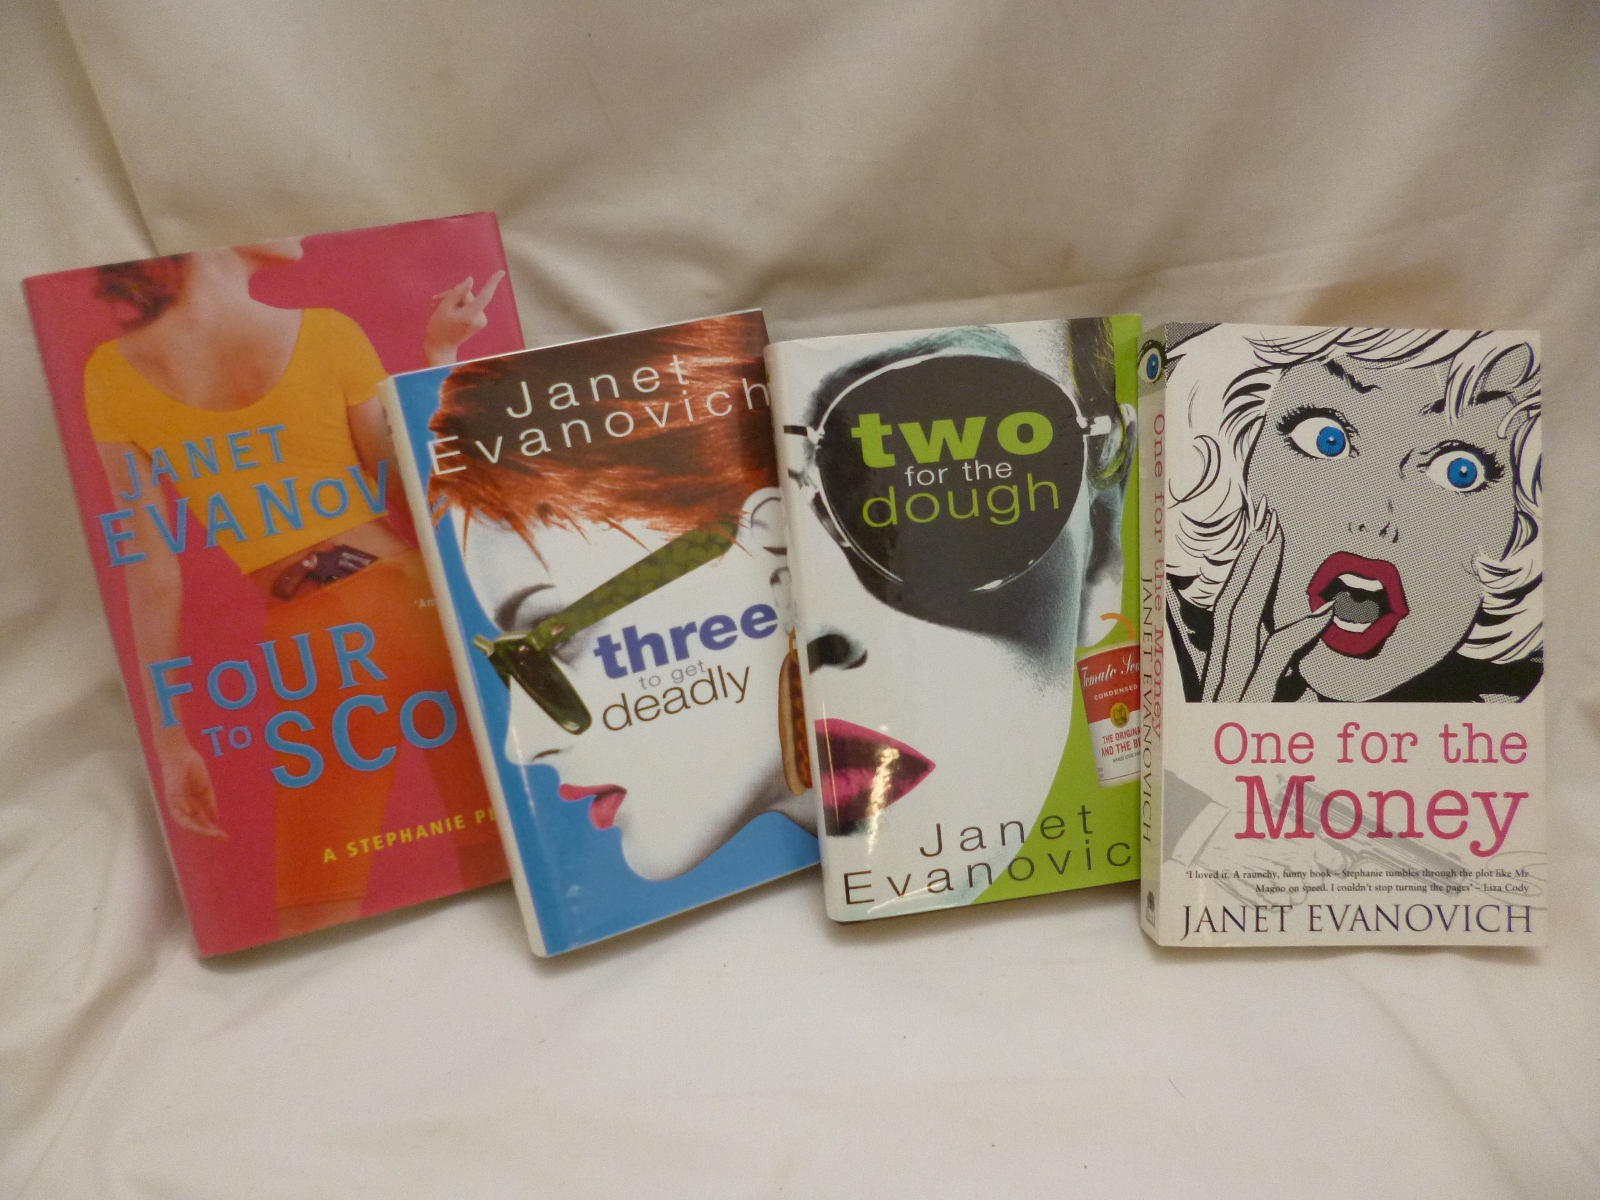 JANET EVANOVICH, 4 ttls: ONE FOR THE MONEY, L, 1995, 1st edn, orig pict wraps; TWO FOR THE DOUGH, L,